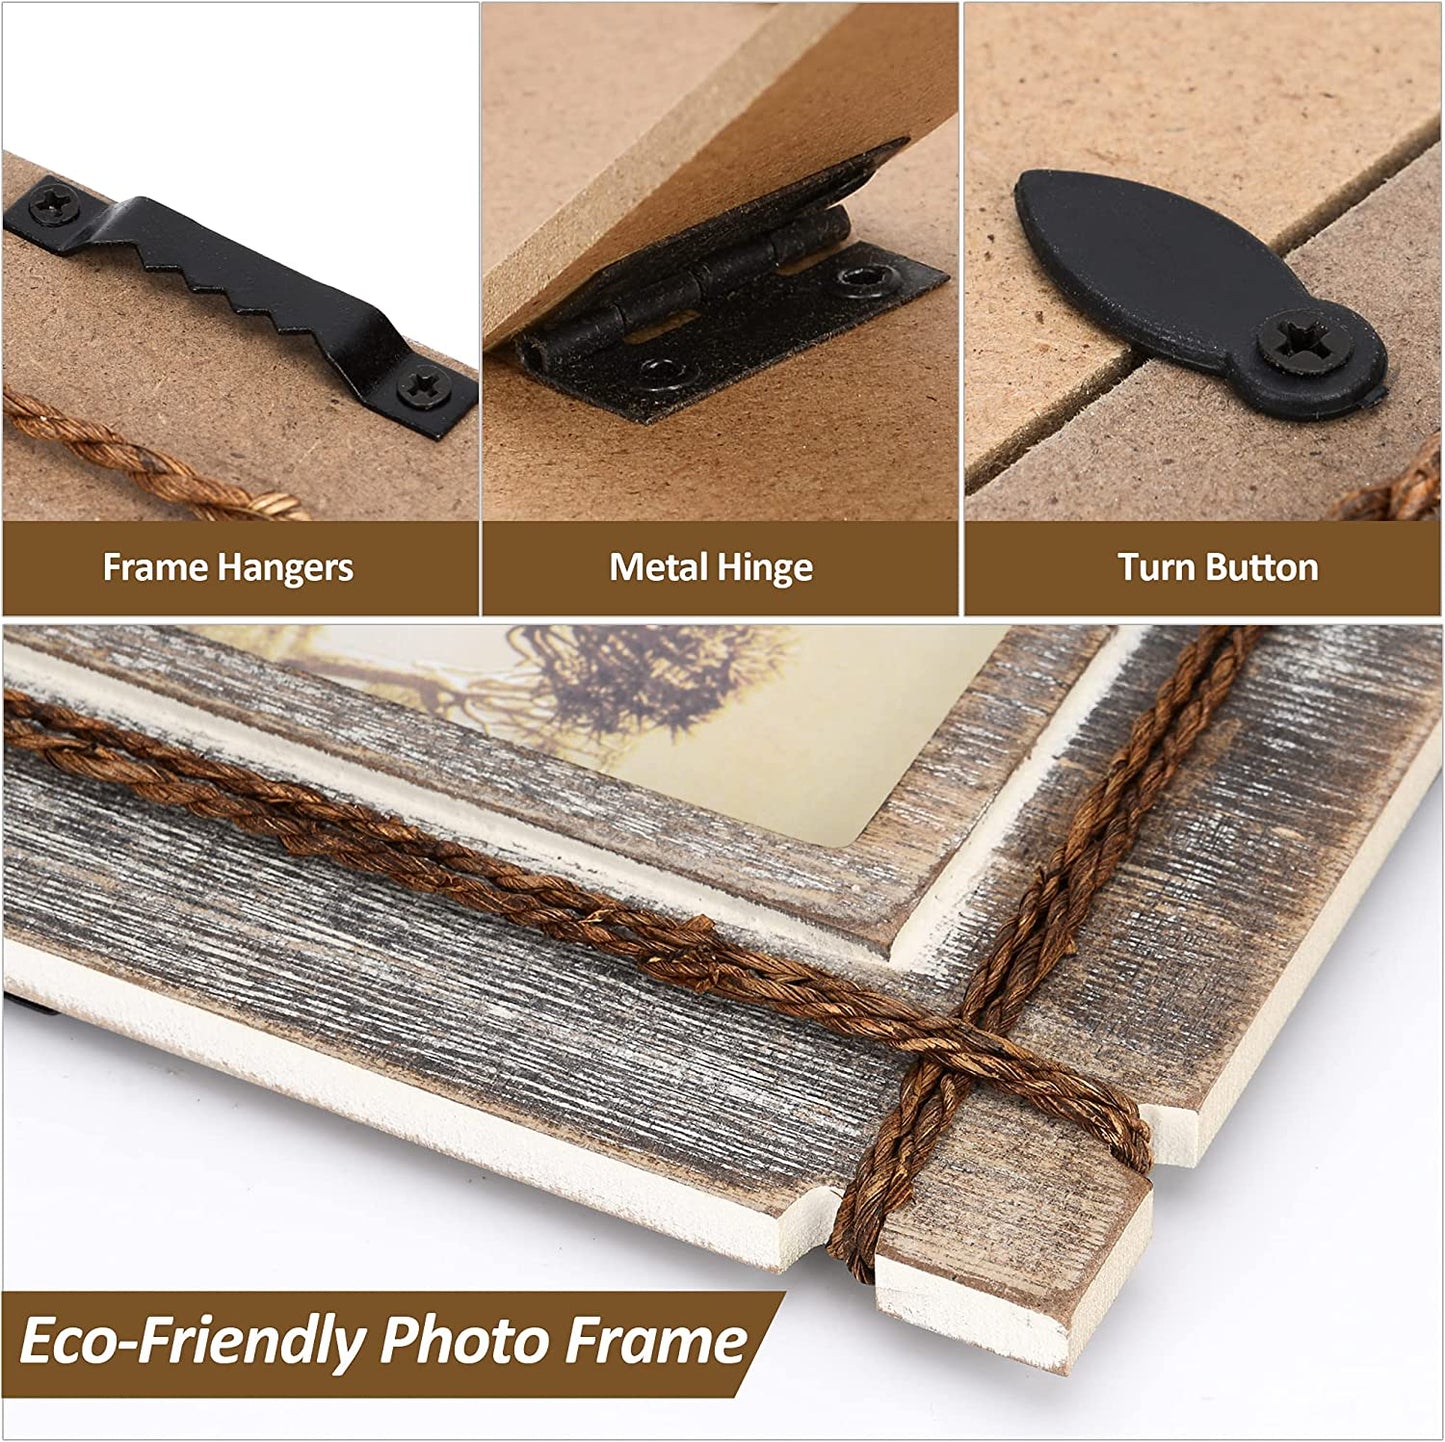 Wood Picture Frames | 3 Opening Picture Frame | Akrilane